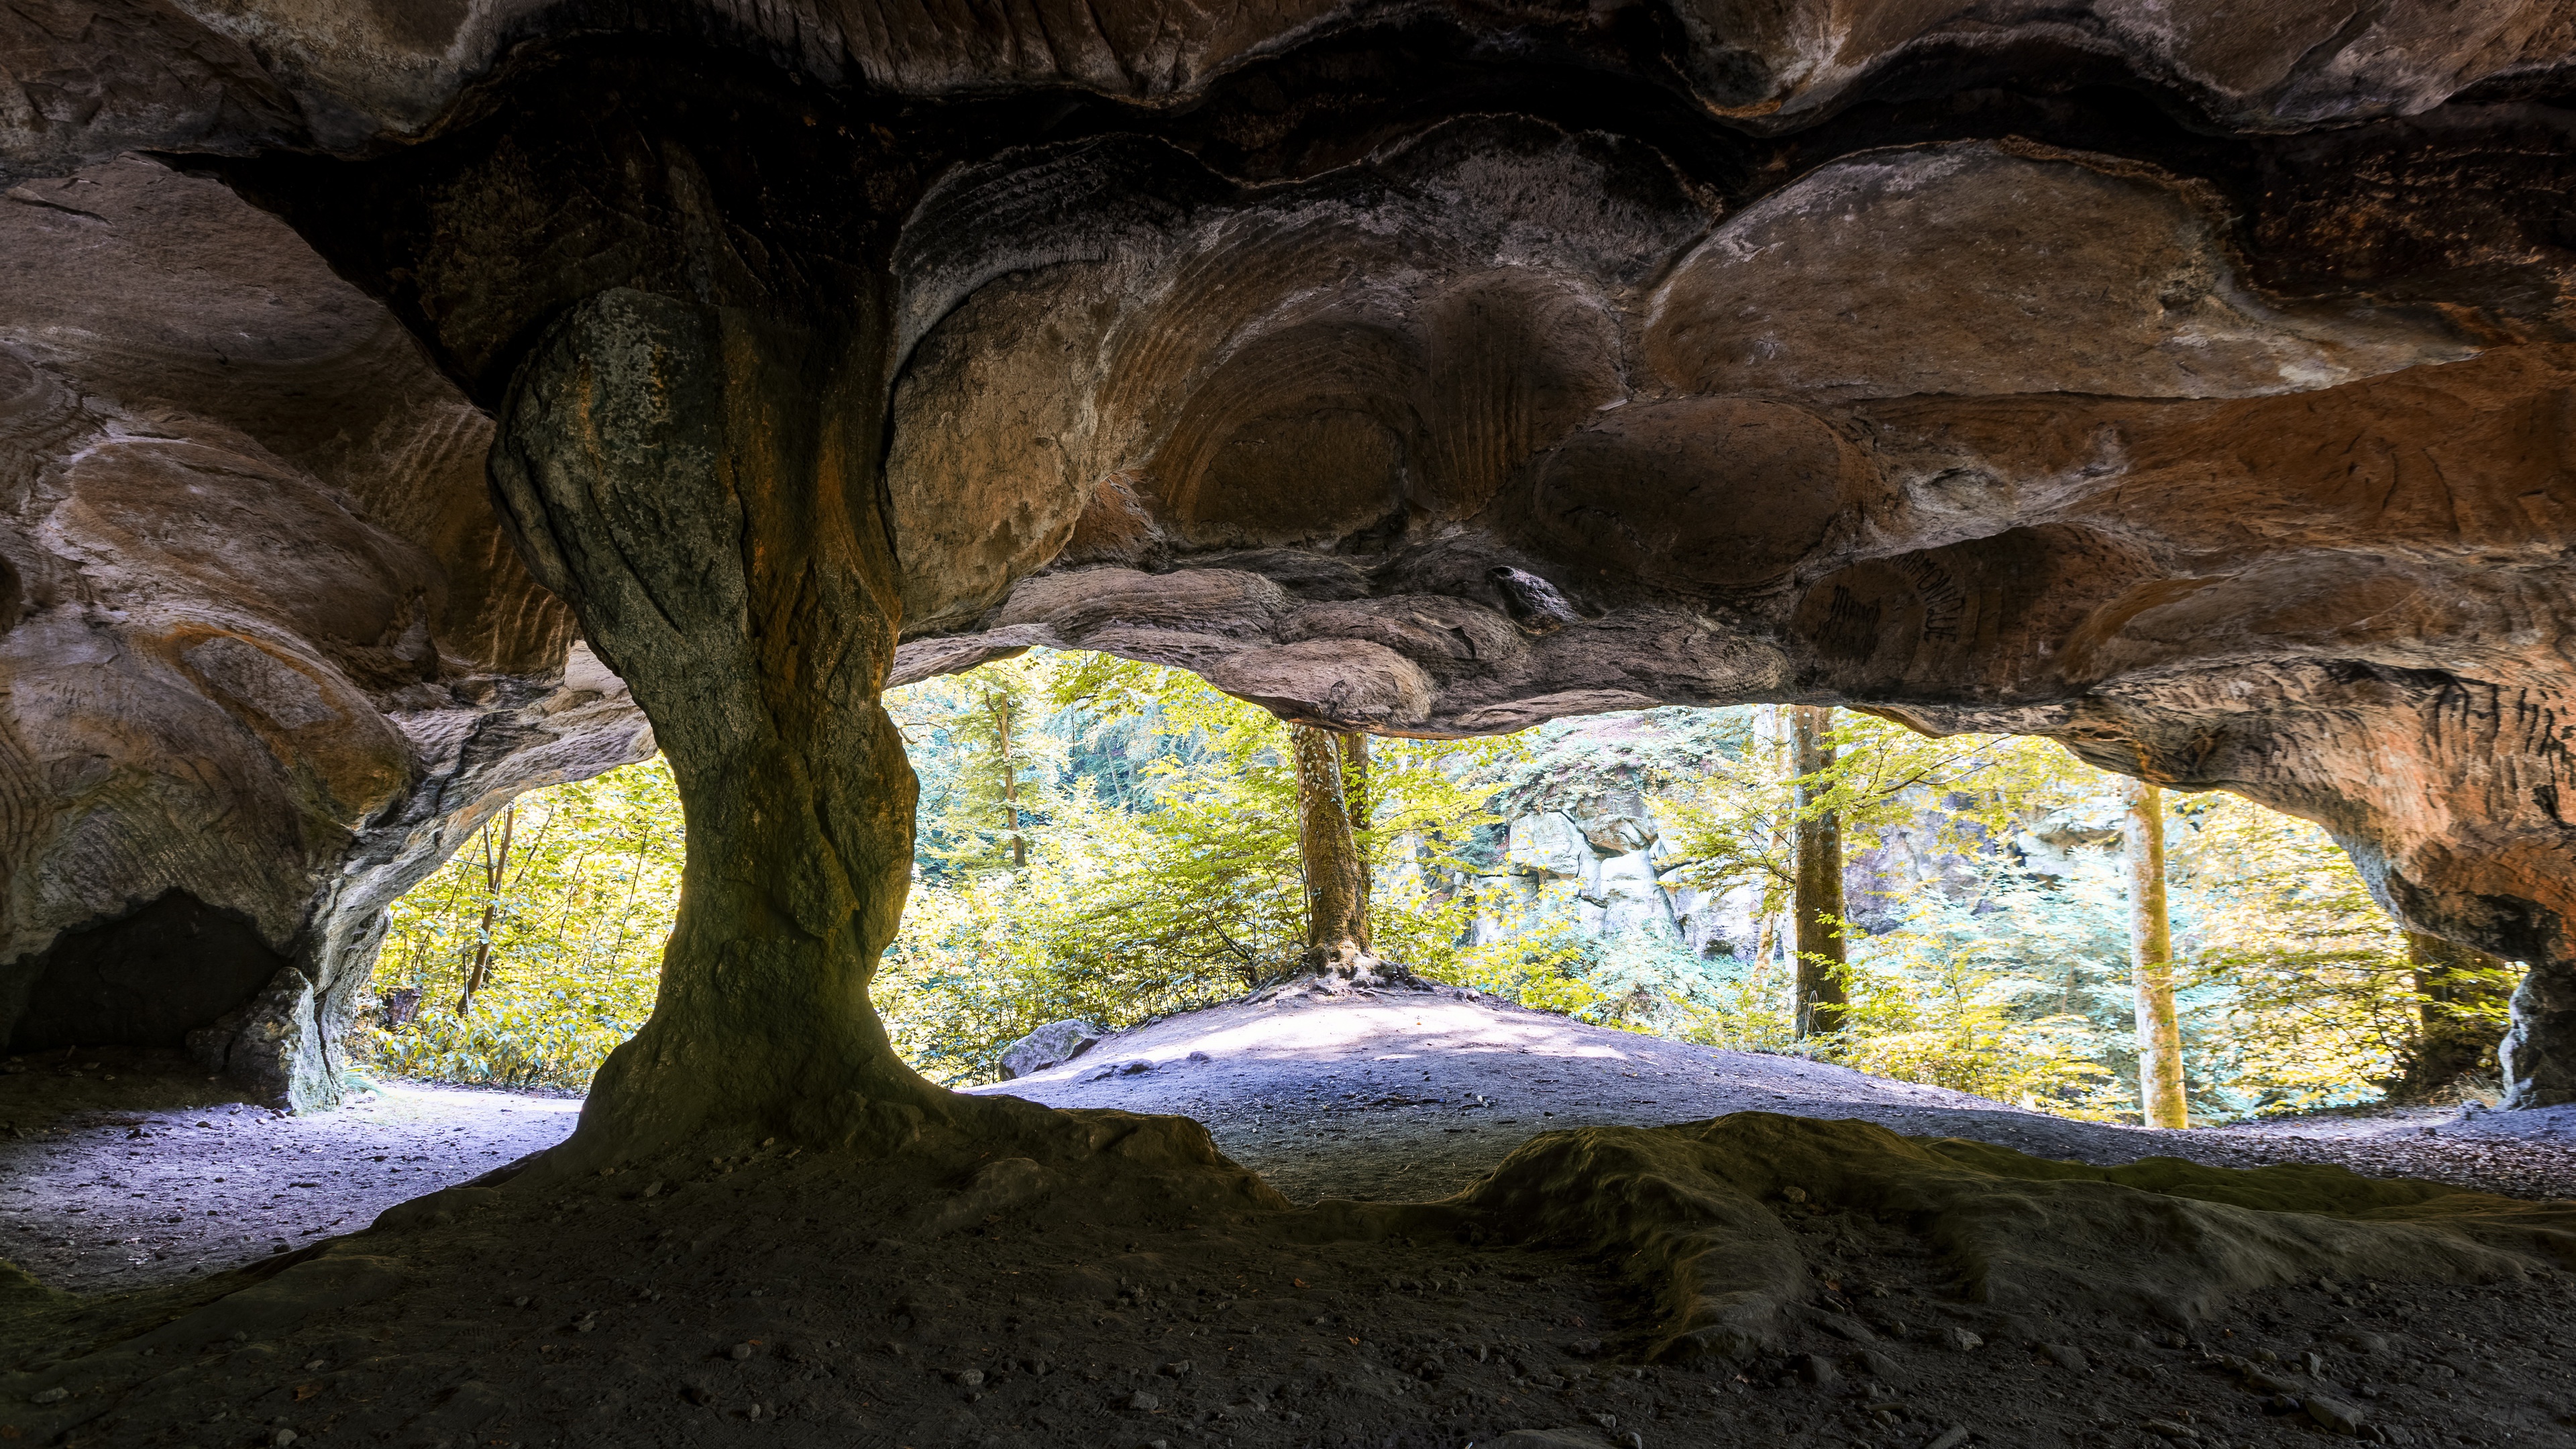 General 3840x2160 nature cave outdoors rocks rock formation